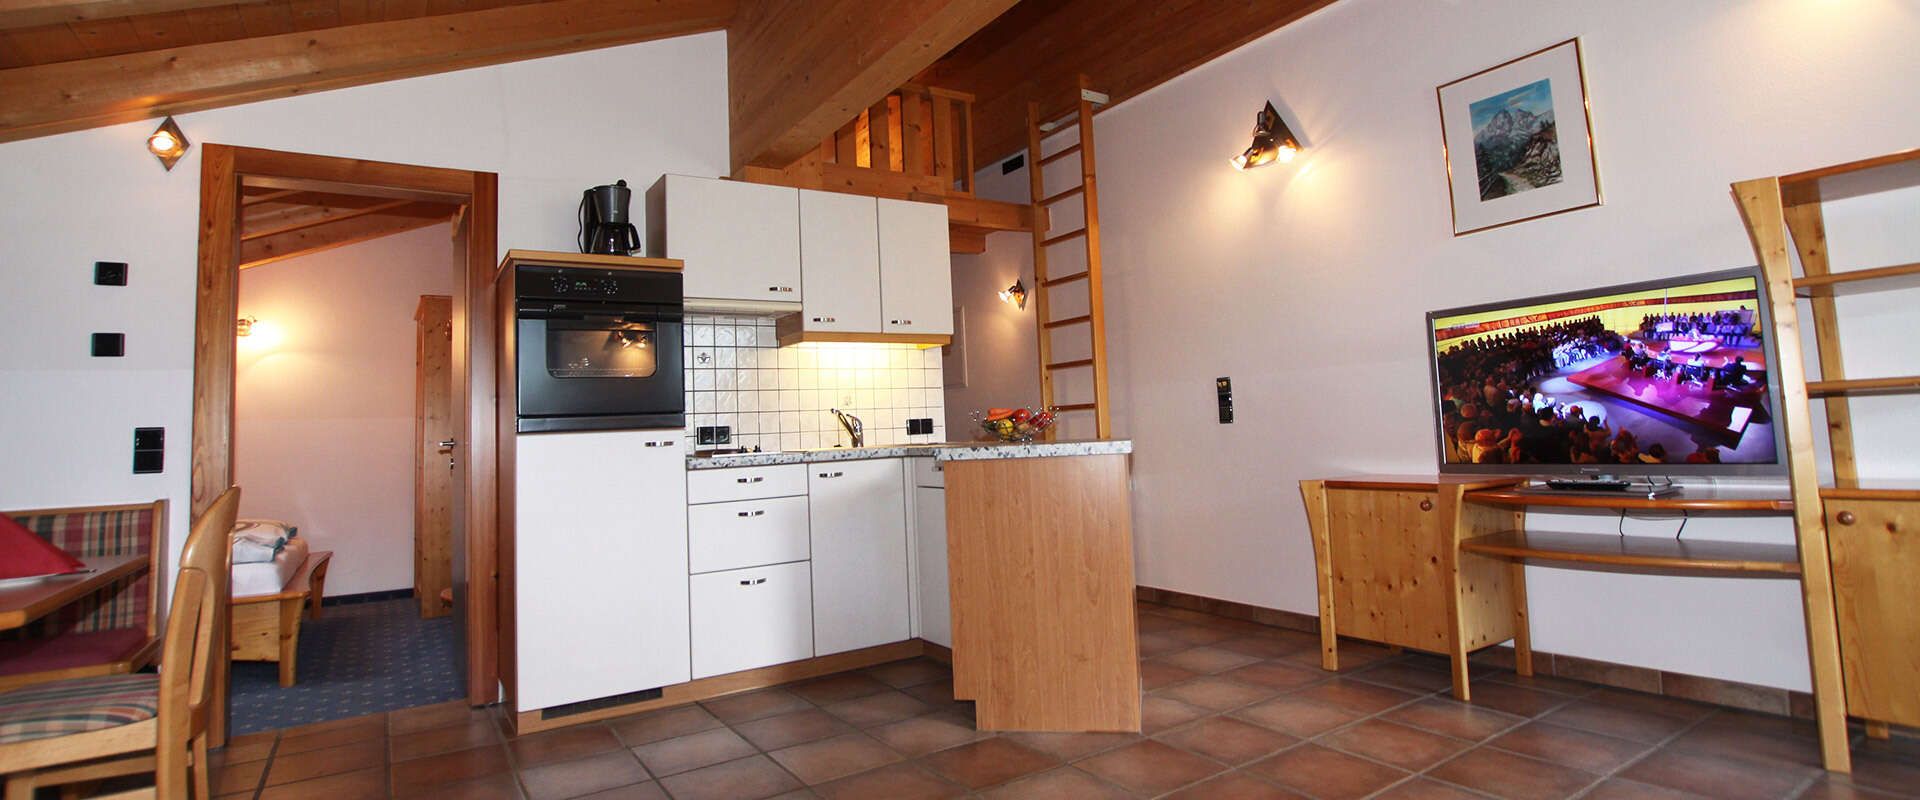 Apartment with kitchen in Wipptal, Tyrol